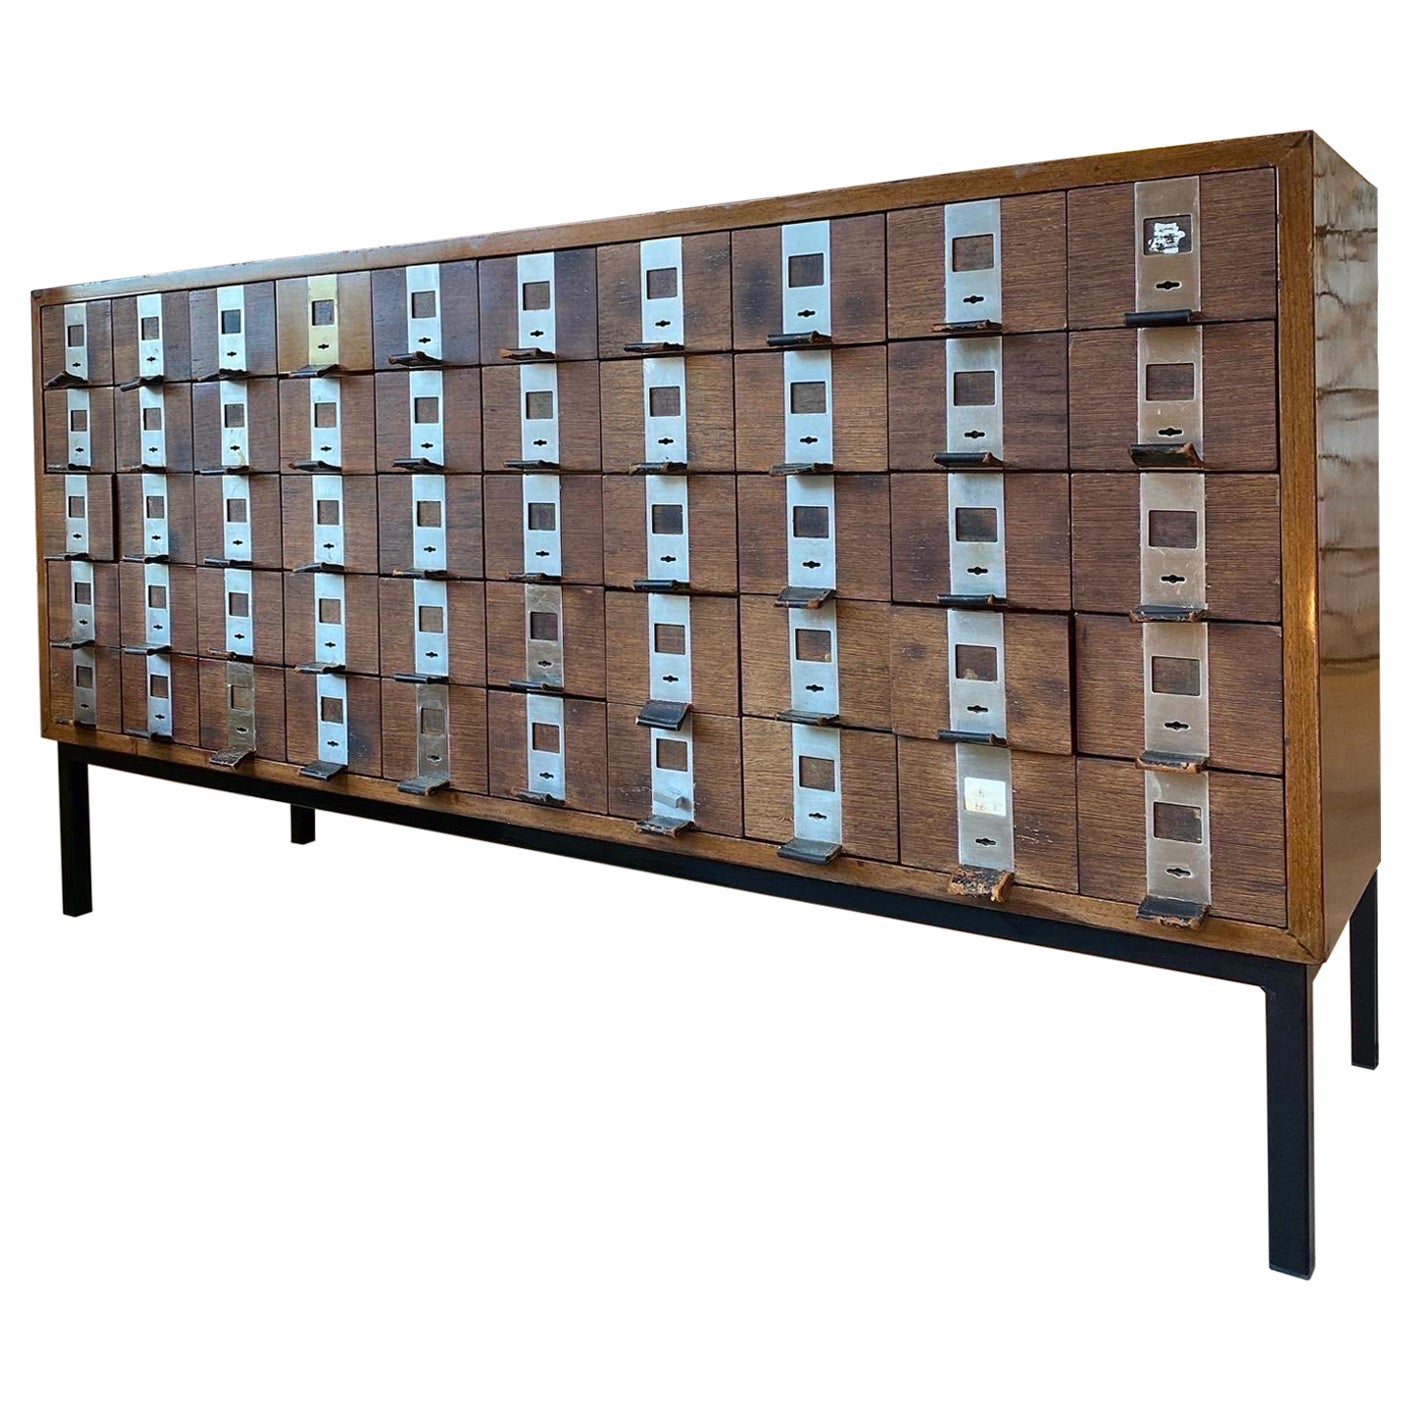 Large Fifty Drawers Shop Counter, Display Sideboard 1958 de Coene, Belgium For Sale